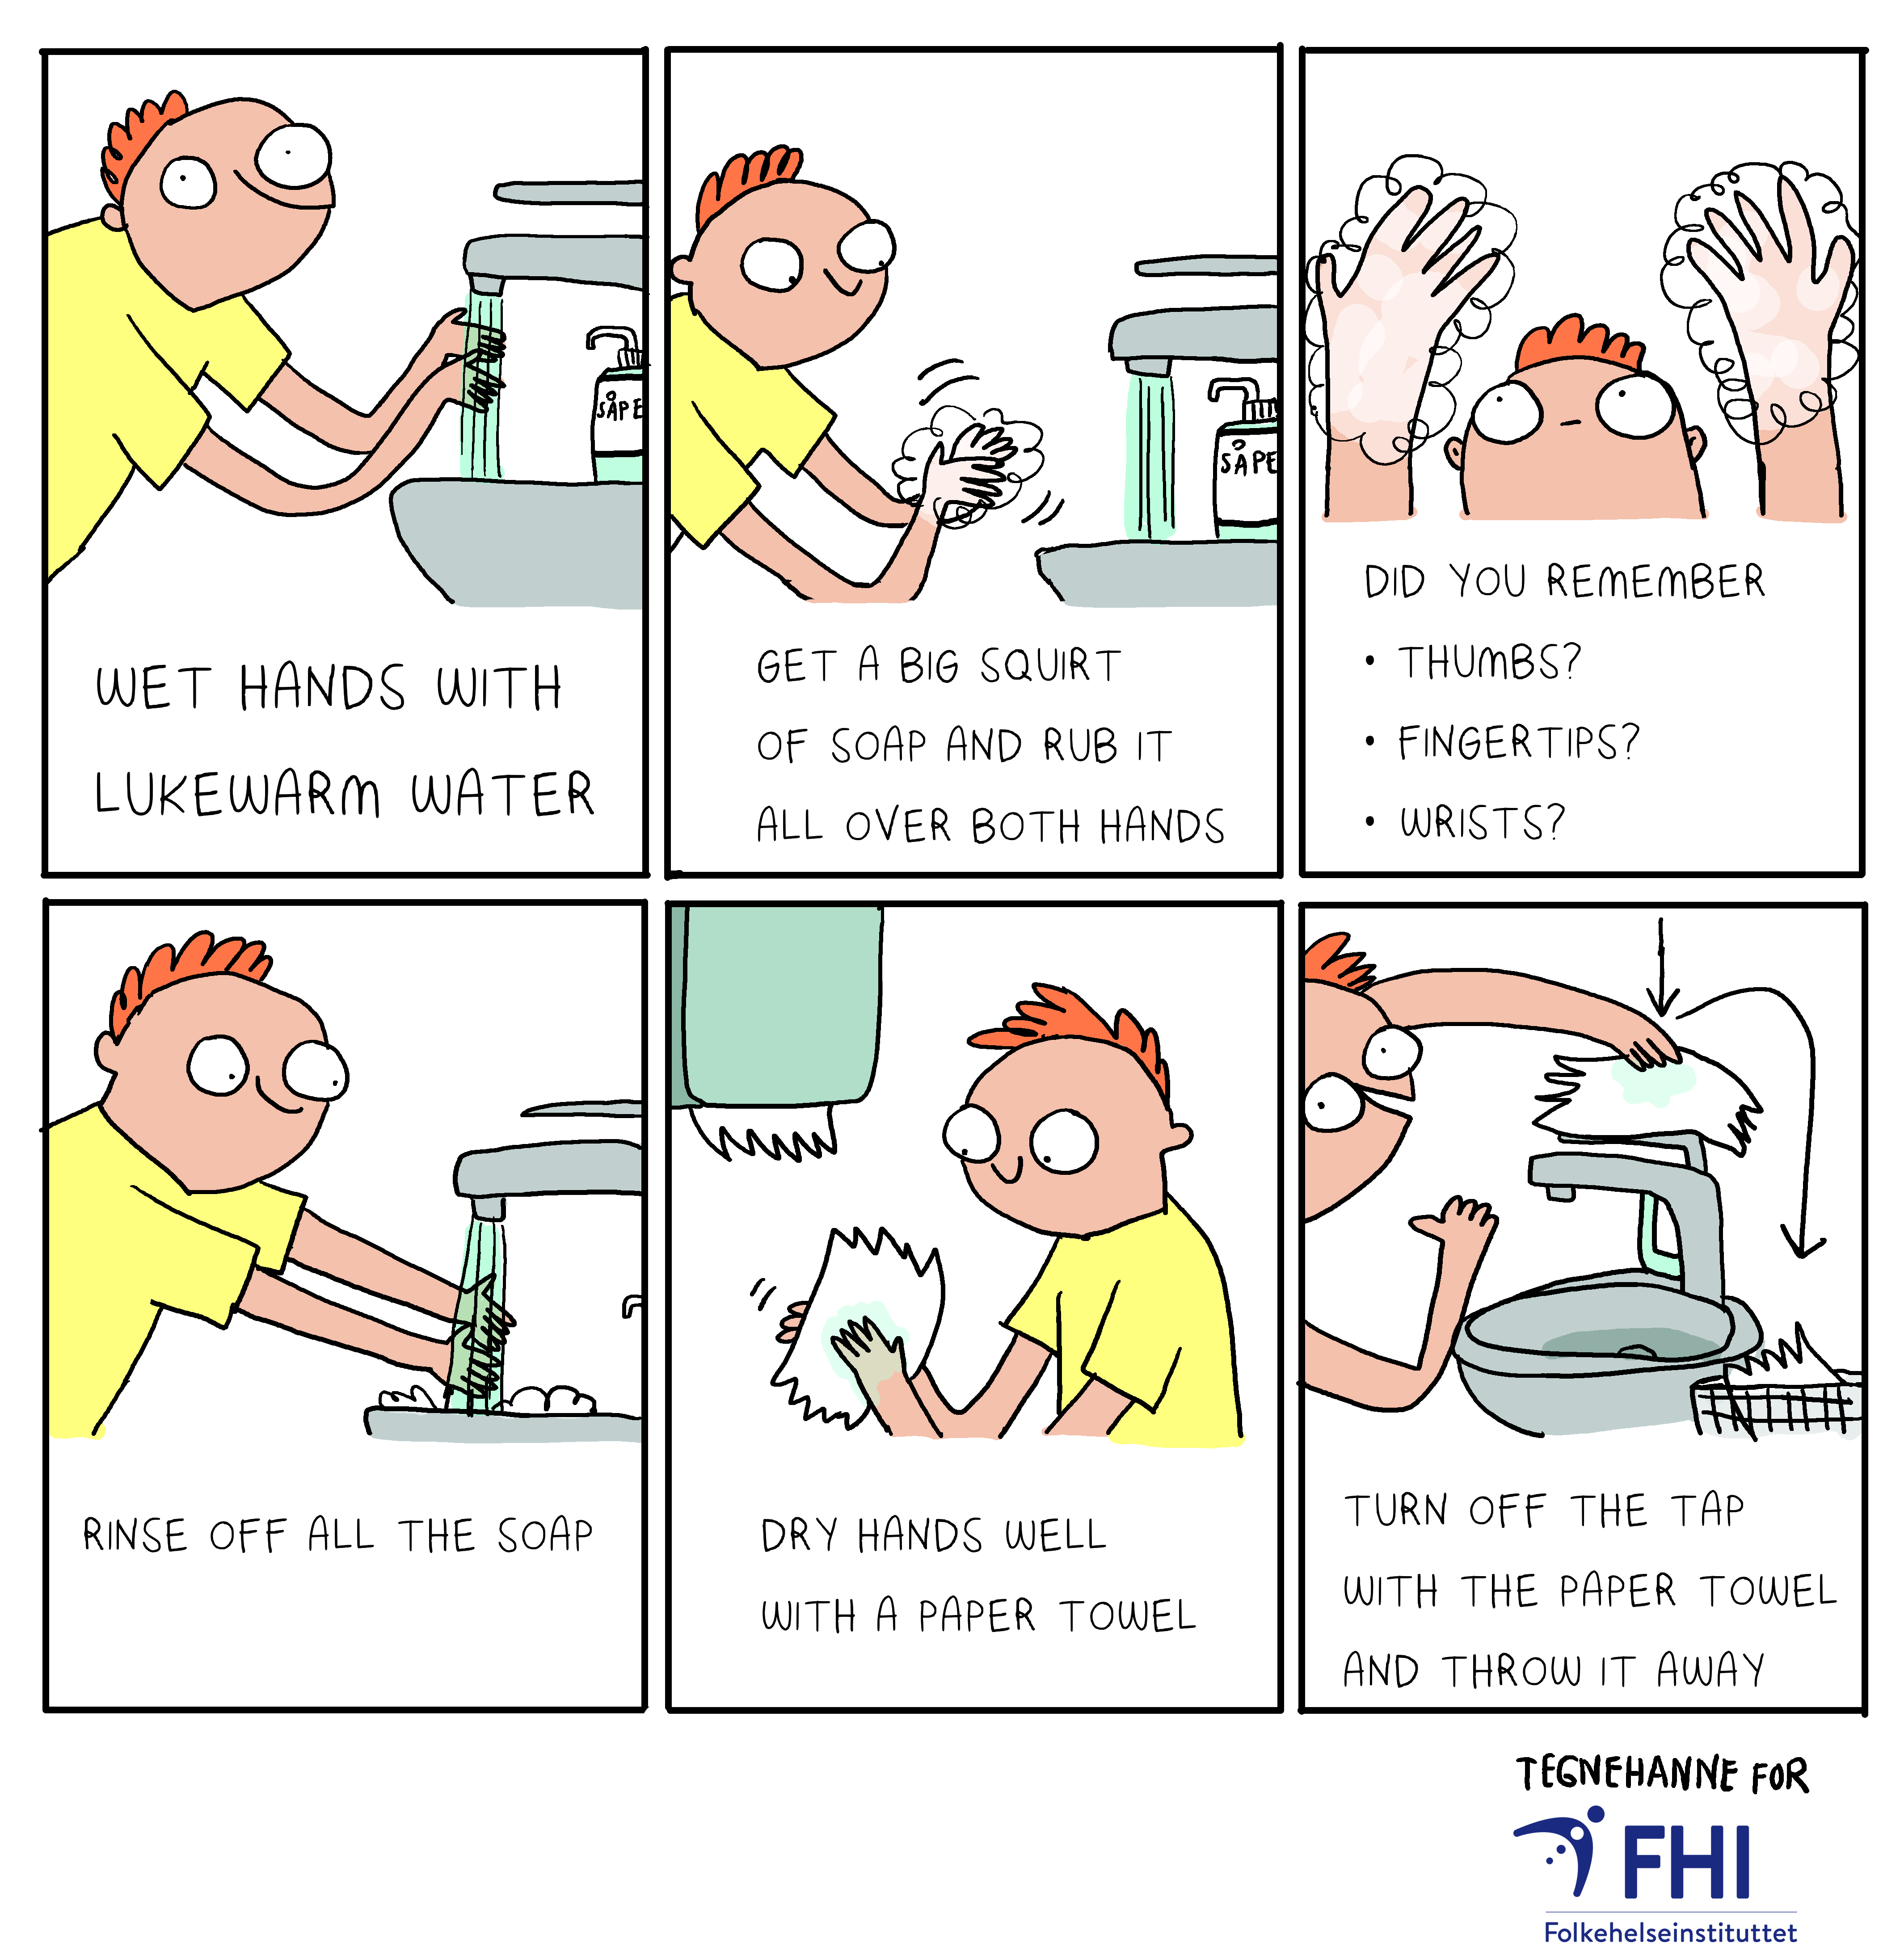 How to wash hands 